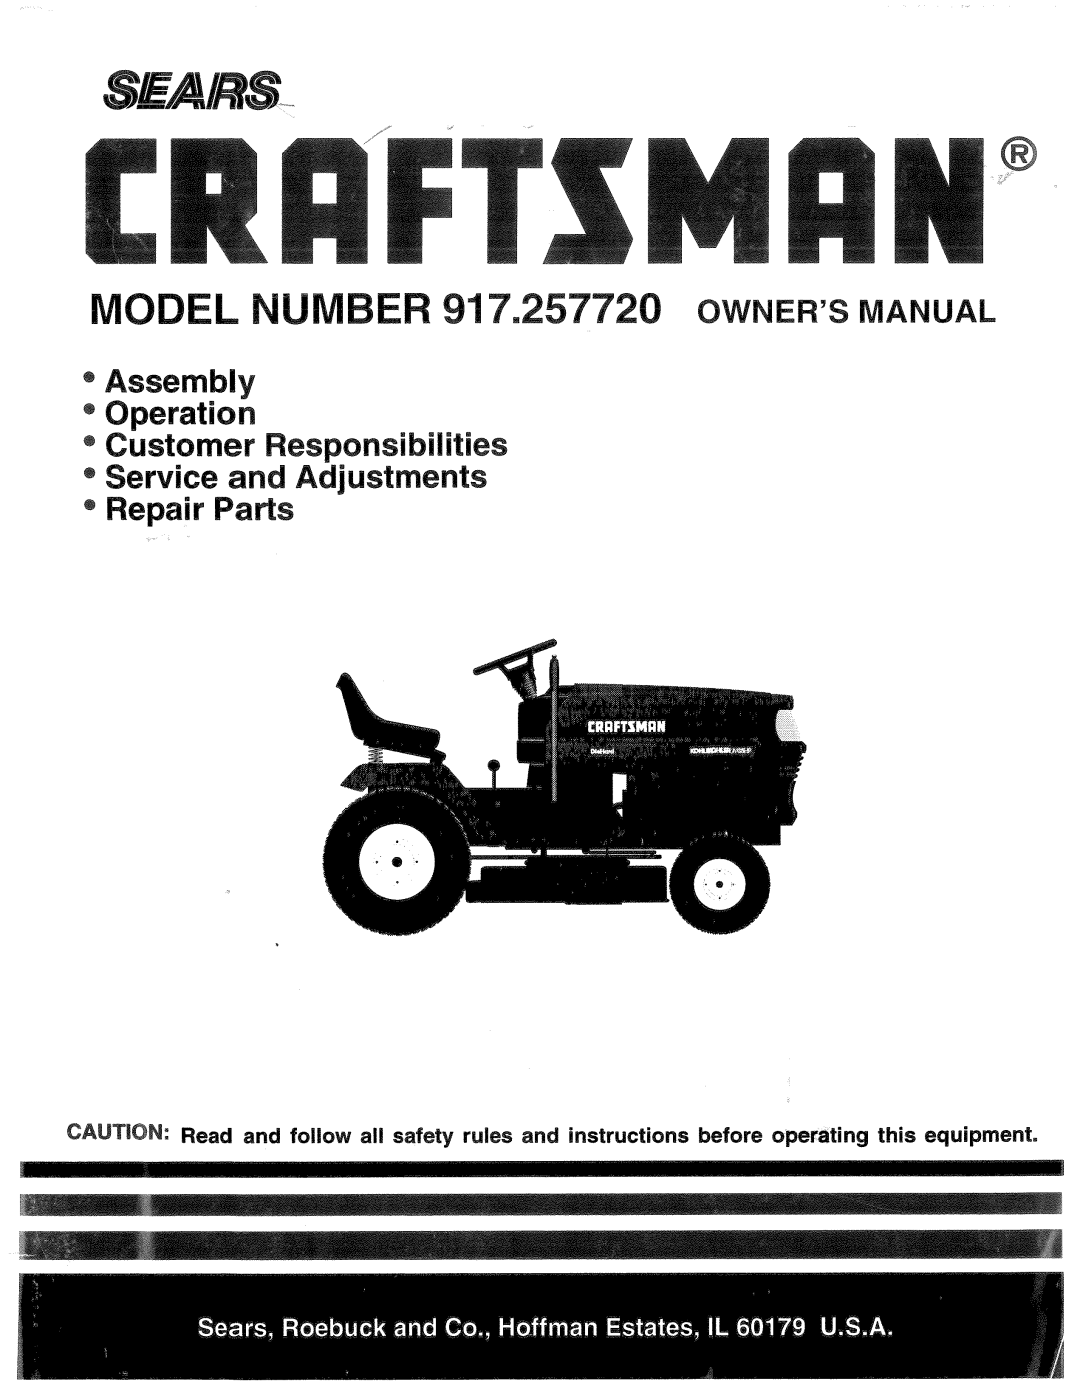 Sears owner manual L NUMBER 917.257720 OWNERSMANUAL, Customer Responsibilities, Assembly Operation 